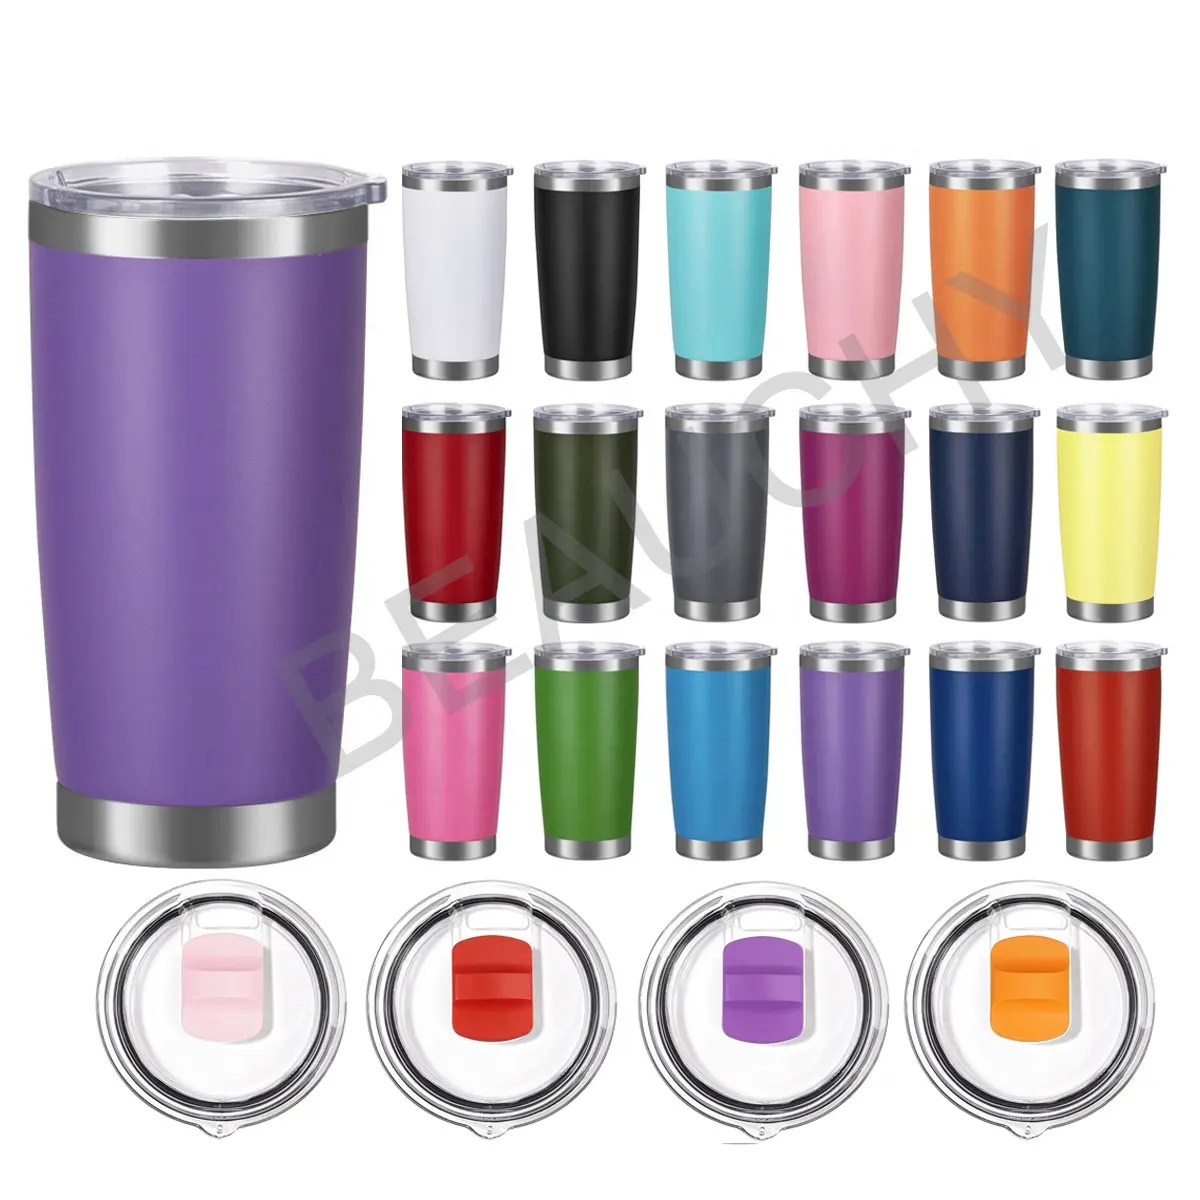 Beauchy Wholesale Car Cup Metal Travel Mug Insulated 20oz Stainless Steel Tumbler Cups In Bulk With Straw Lid